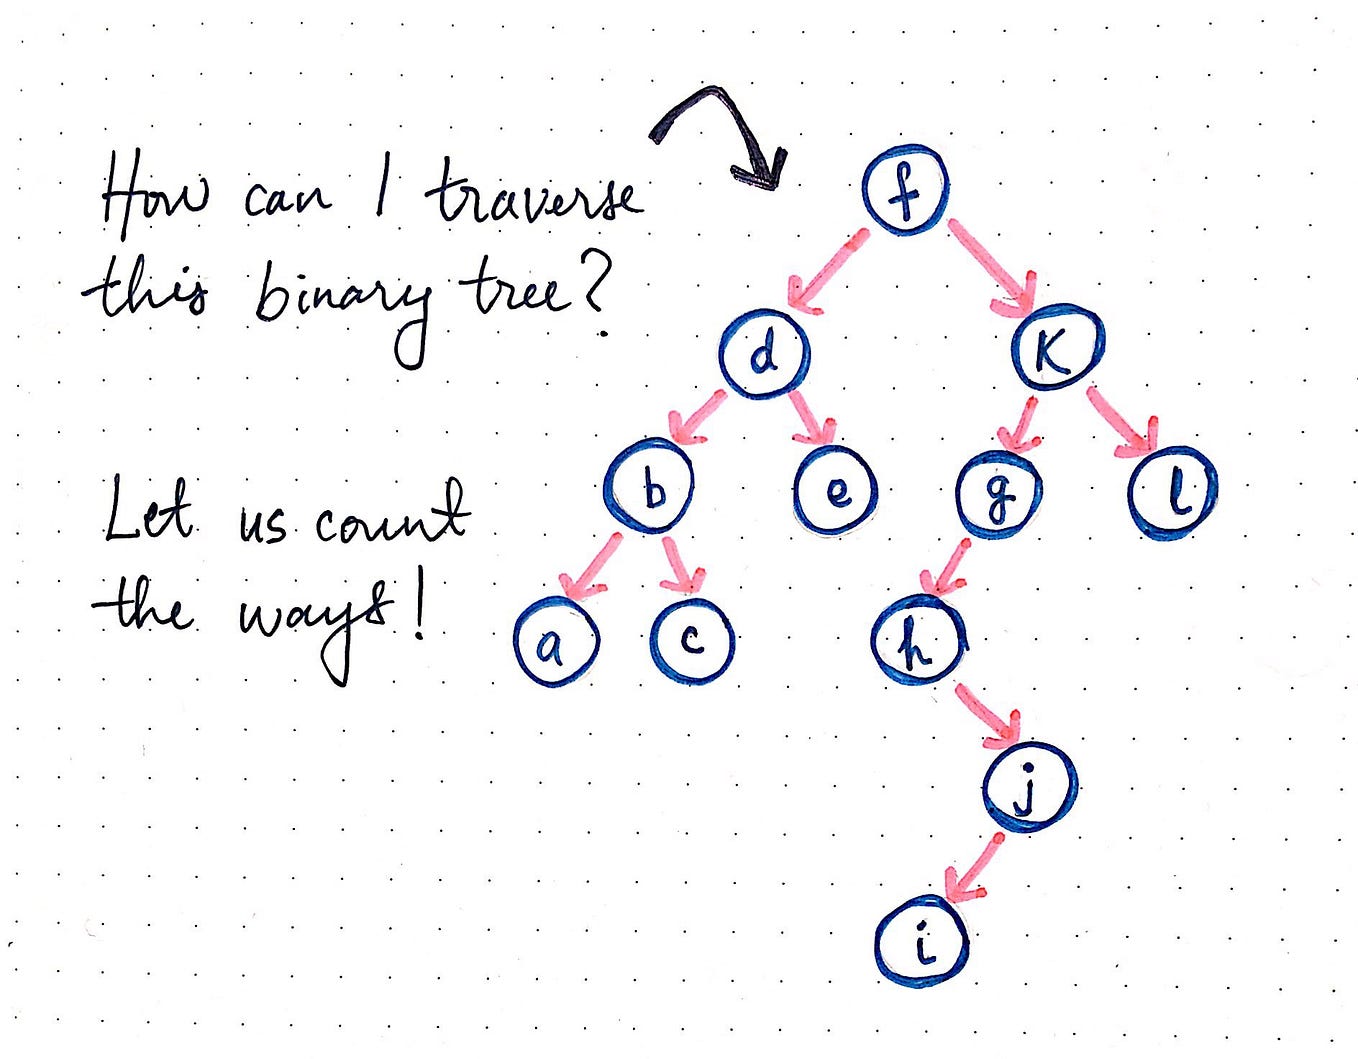 Binary Search Tree Demo: DFS (Depth First Search) 